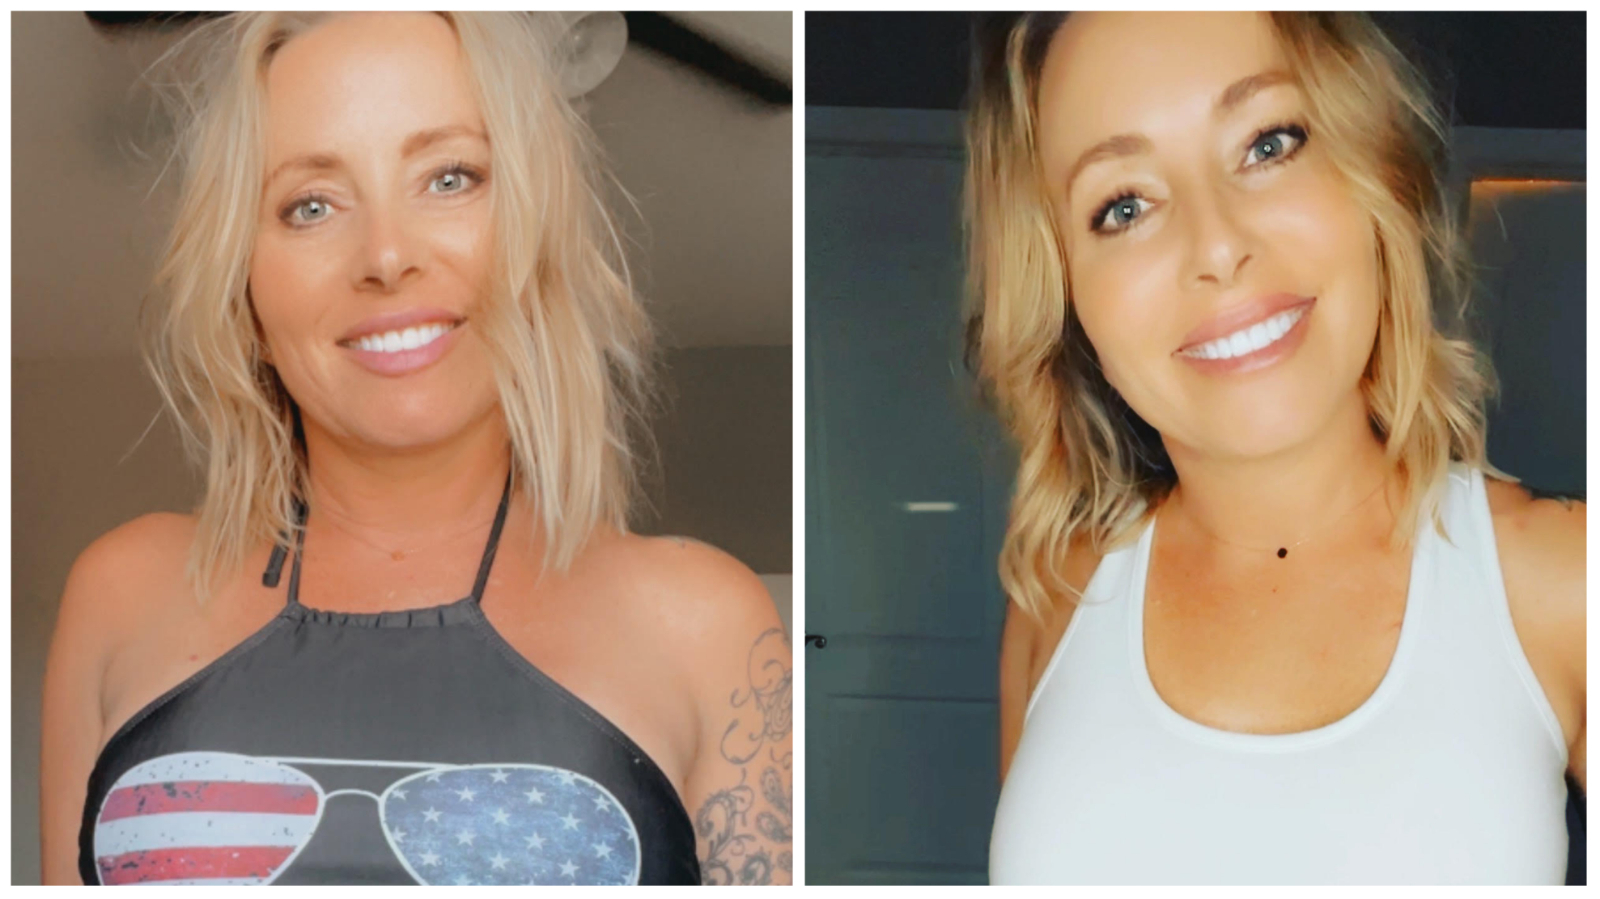 Regional Small-Town Mom Ignores The Haters While Making Big Money On Adult Site “OnlyFans” Your Wyoming News Source image photo